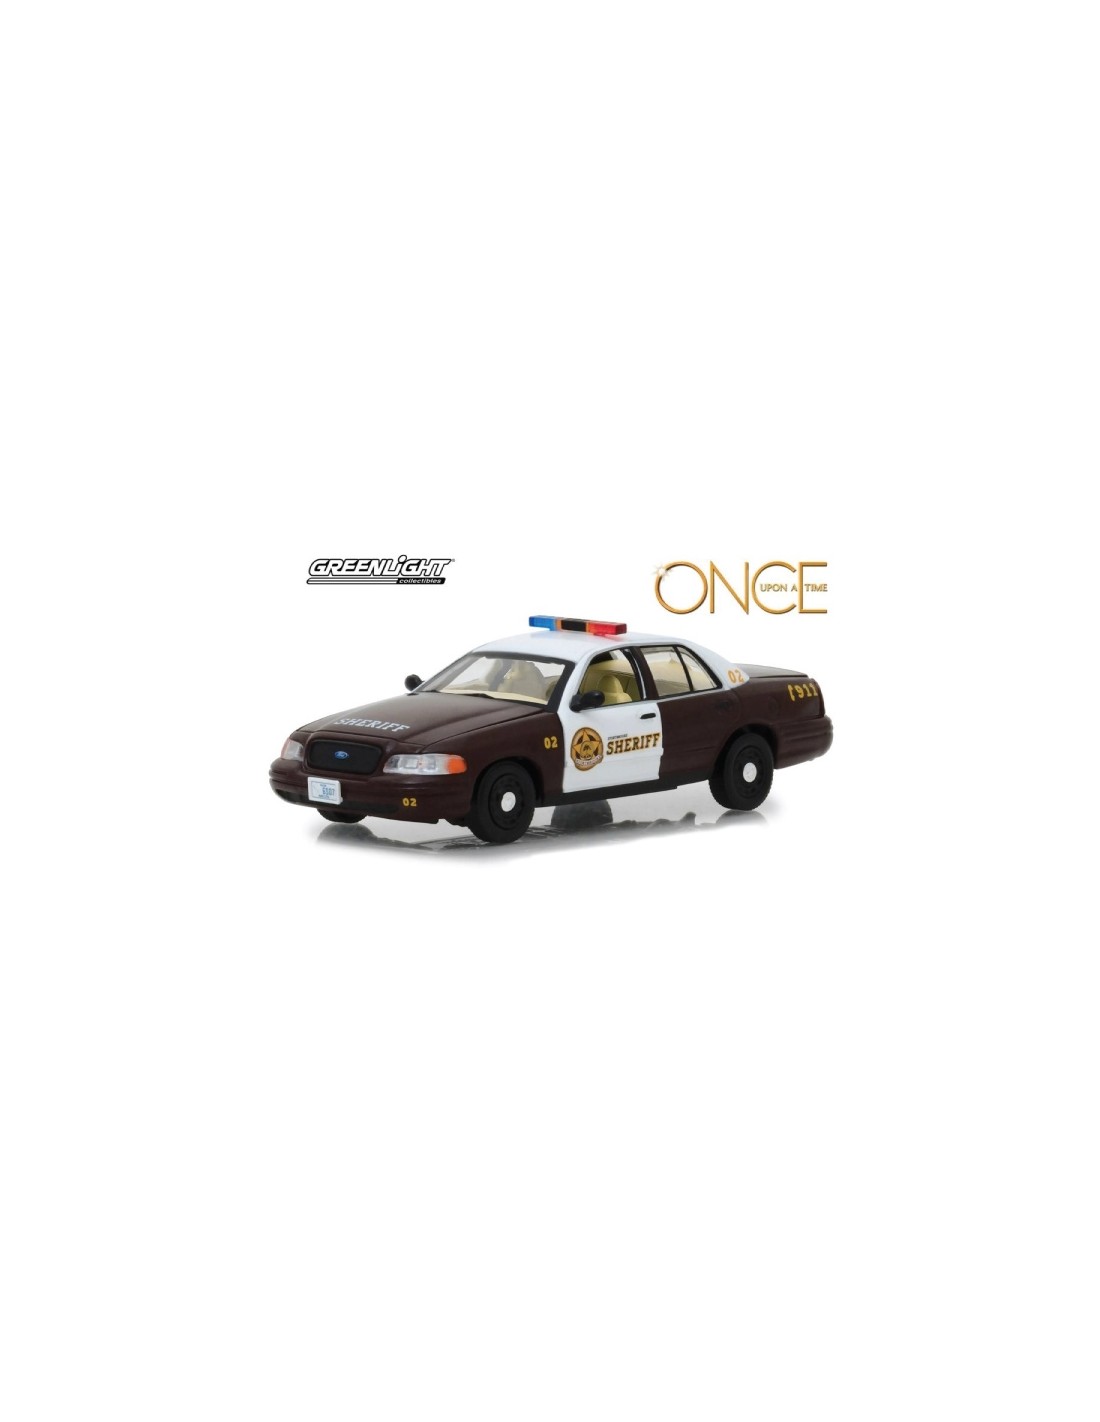 2005 FORD CROWN VICTORIA POLICE ONCE UPON A TIME 1//43 CAR BY GREENLIGHT 86525